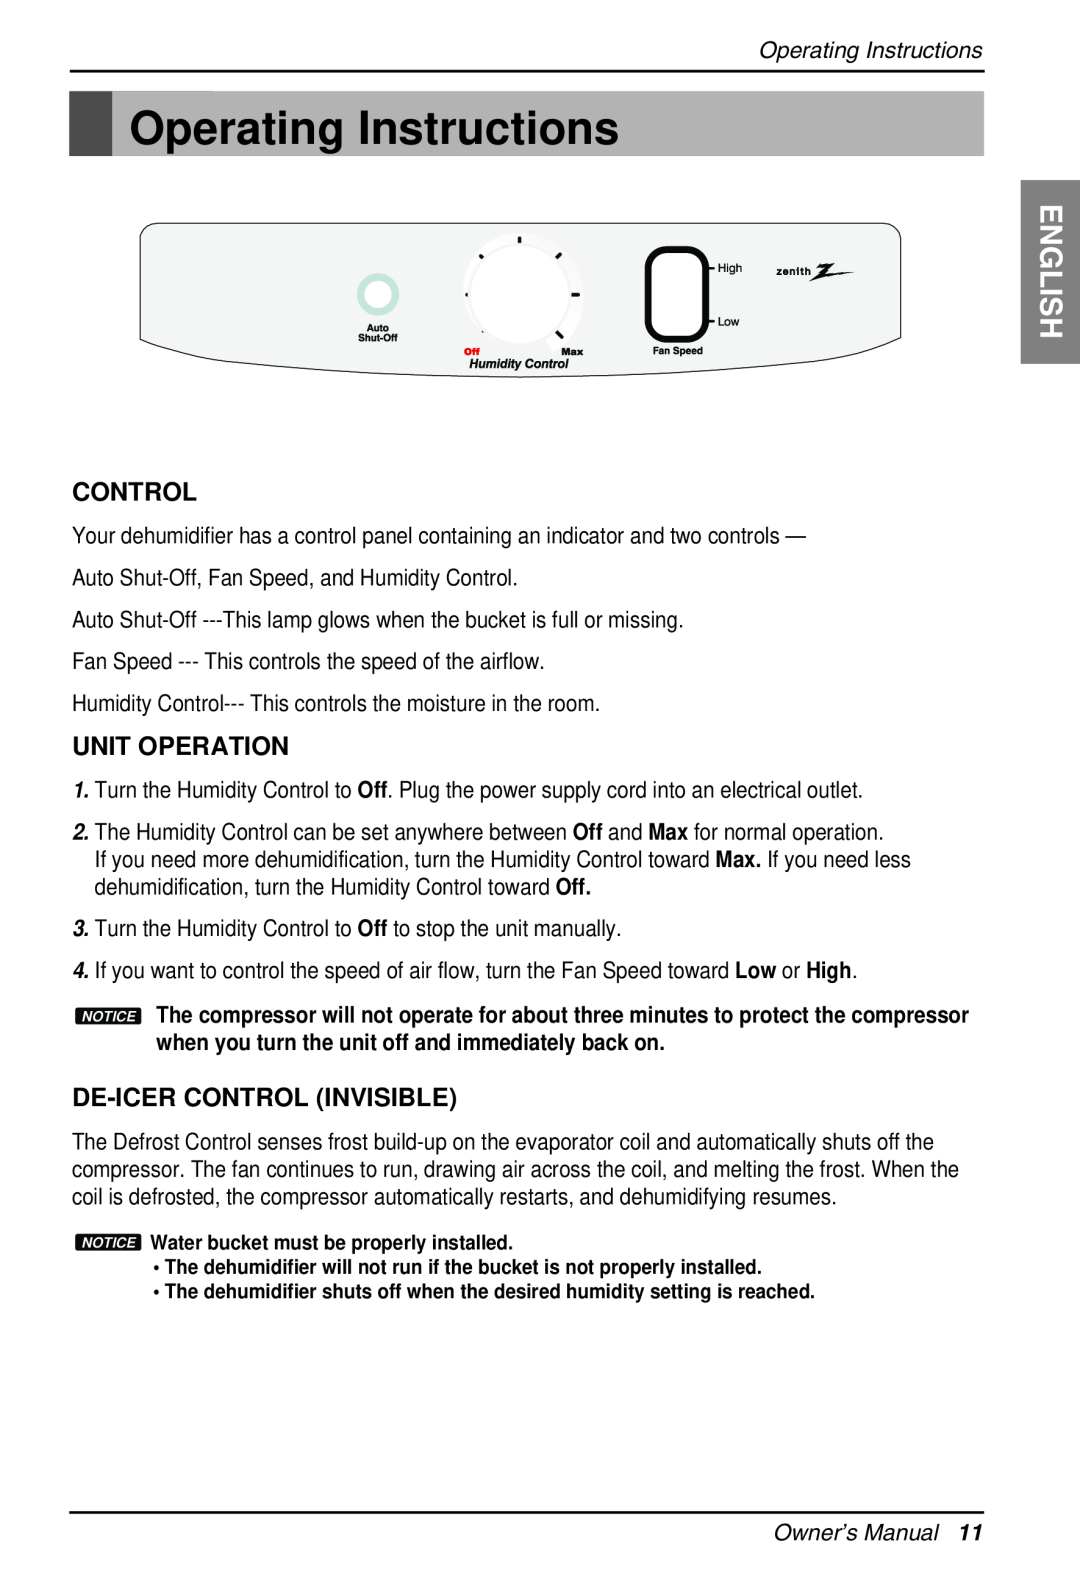 Zenith ZD309 owner manual Operating Instructions, English, Control, Unit Operation, De-Icercontrol Invisible 